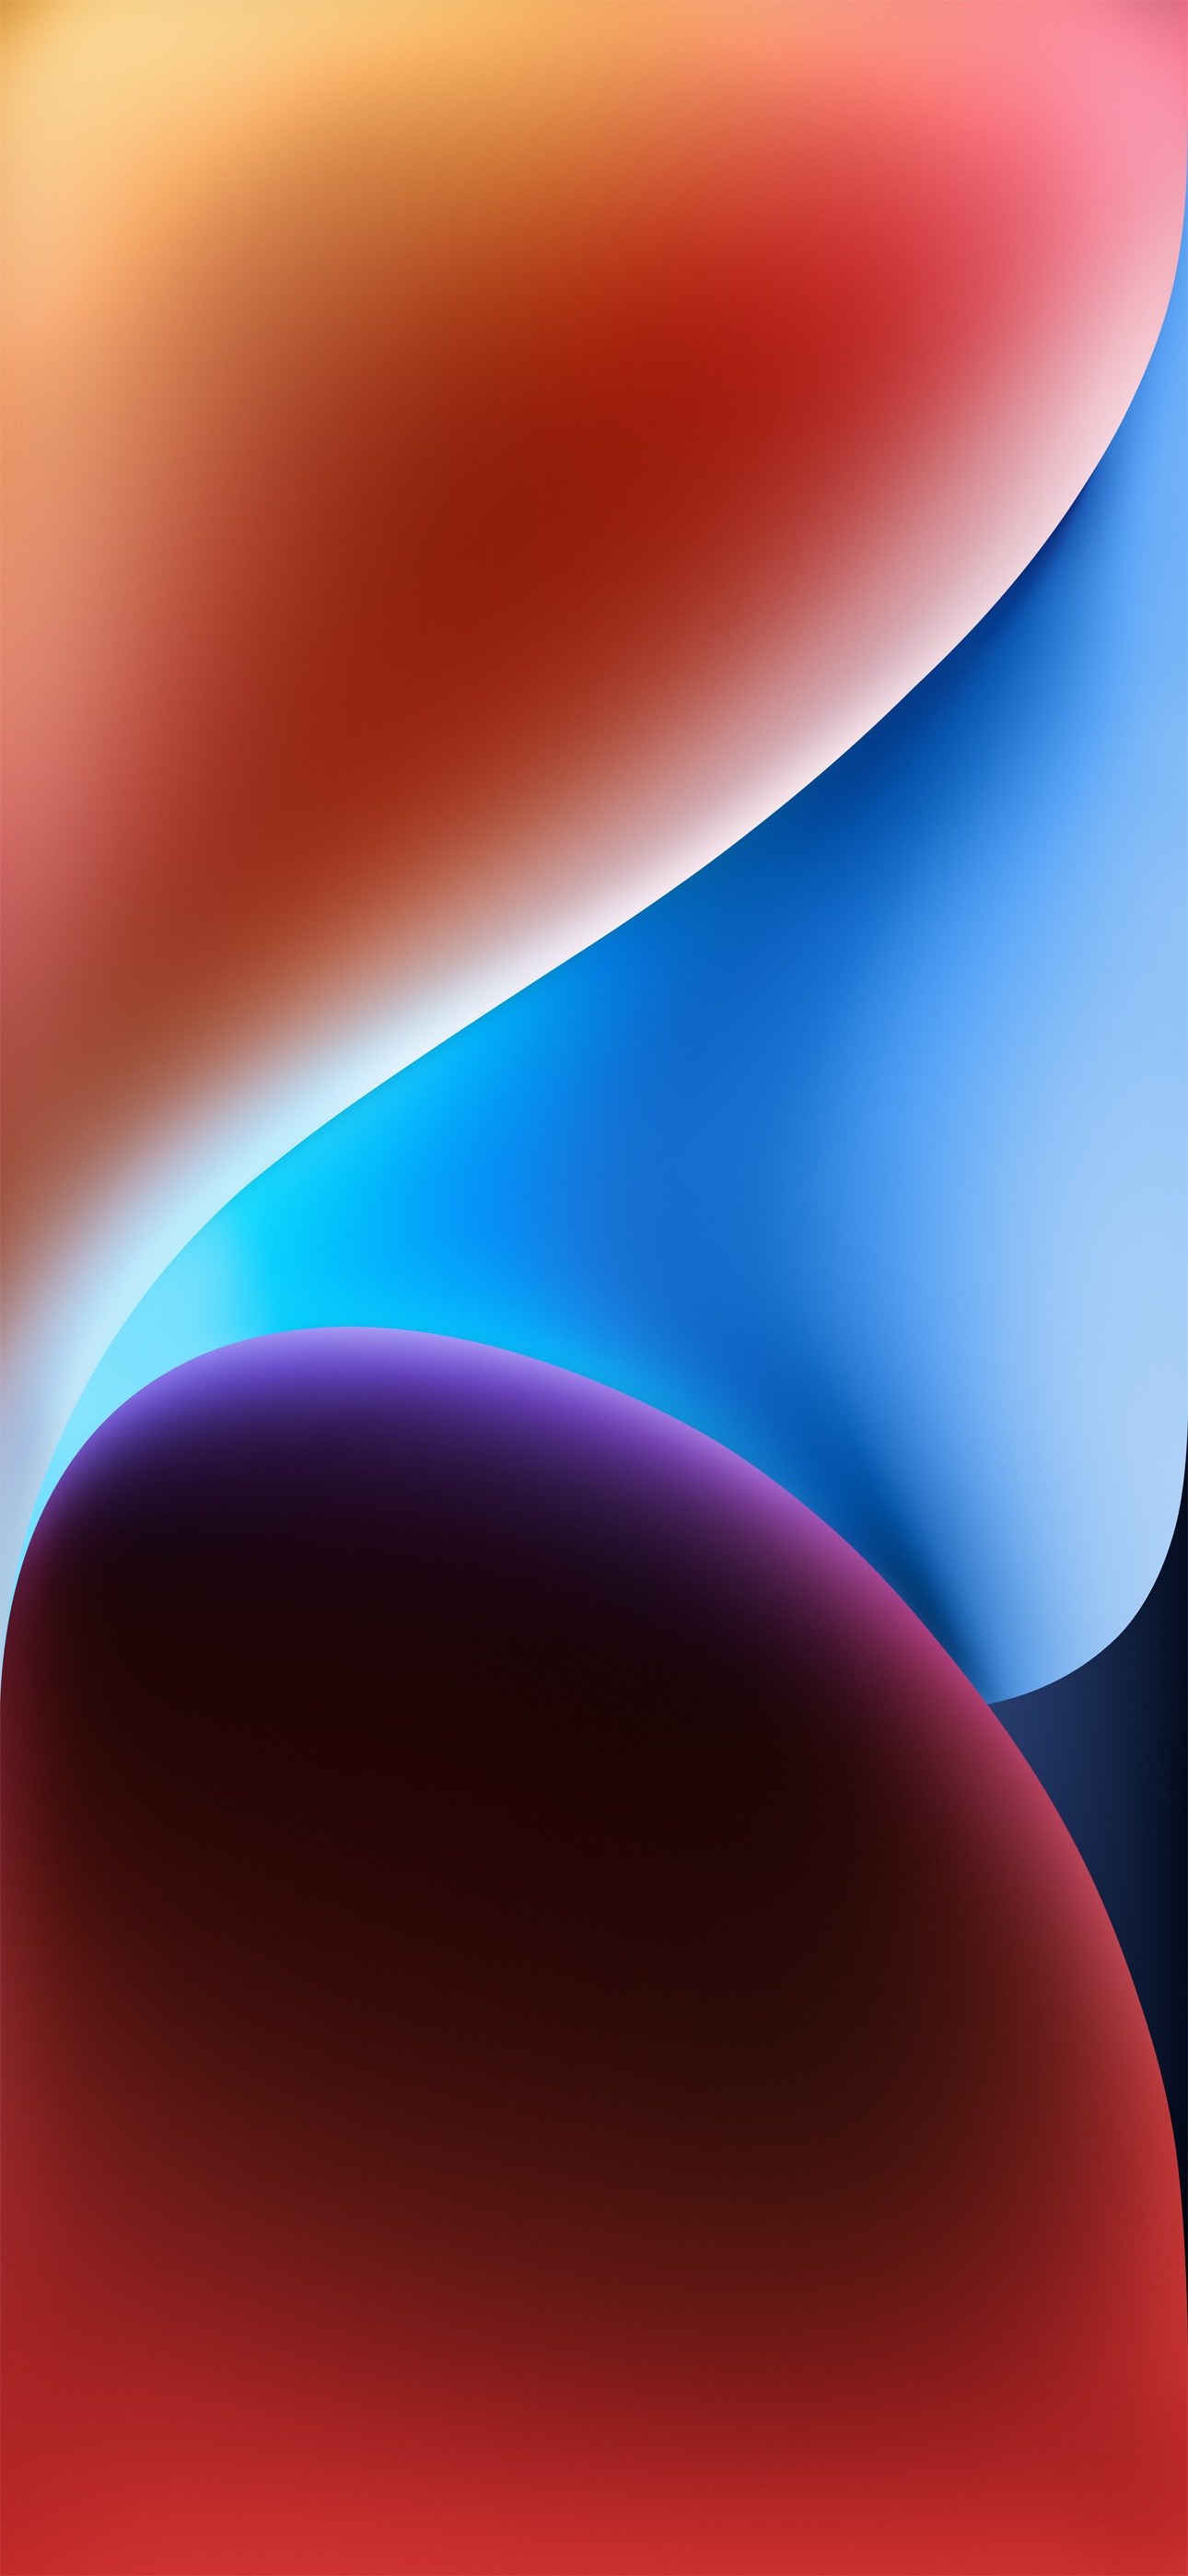 Download the official iPhone 14 and 14 Pro wallpapers in full resolution right here